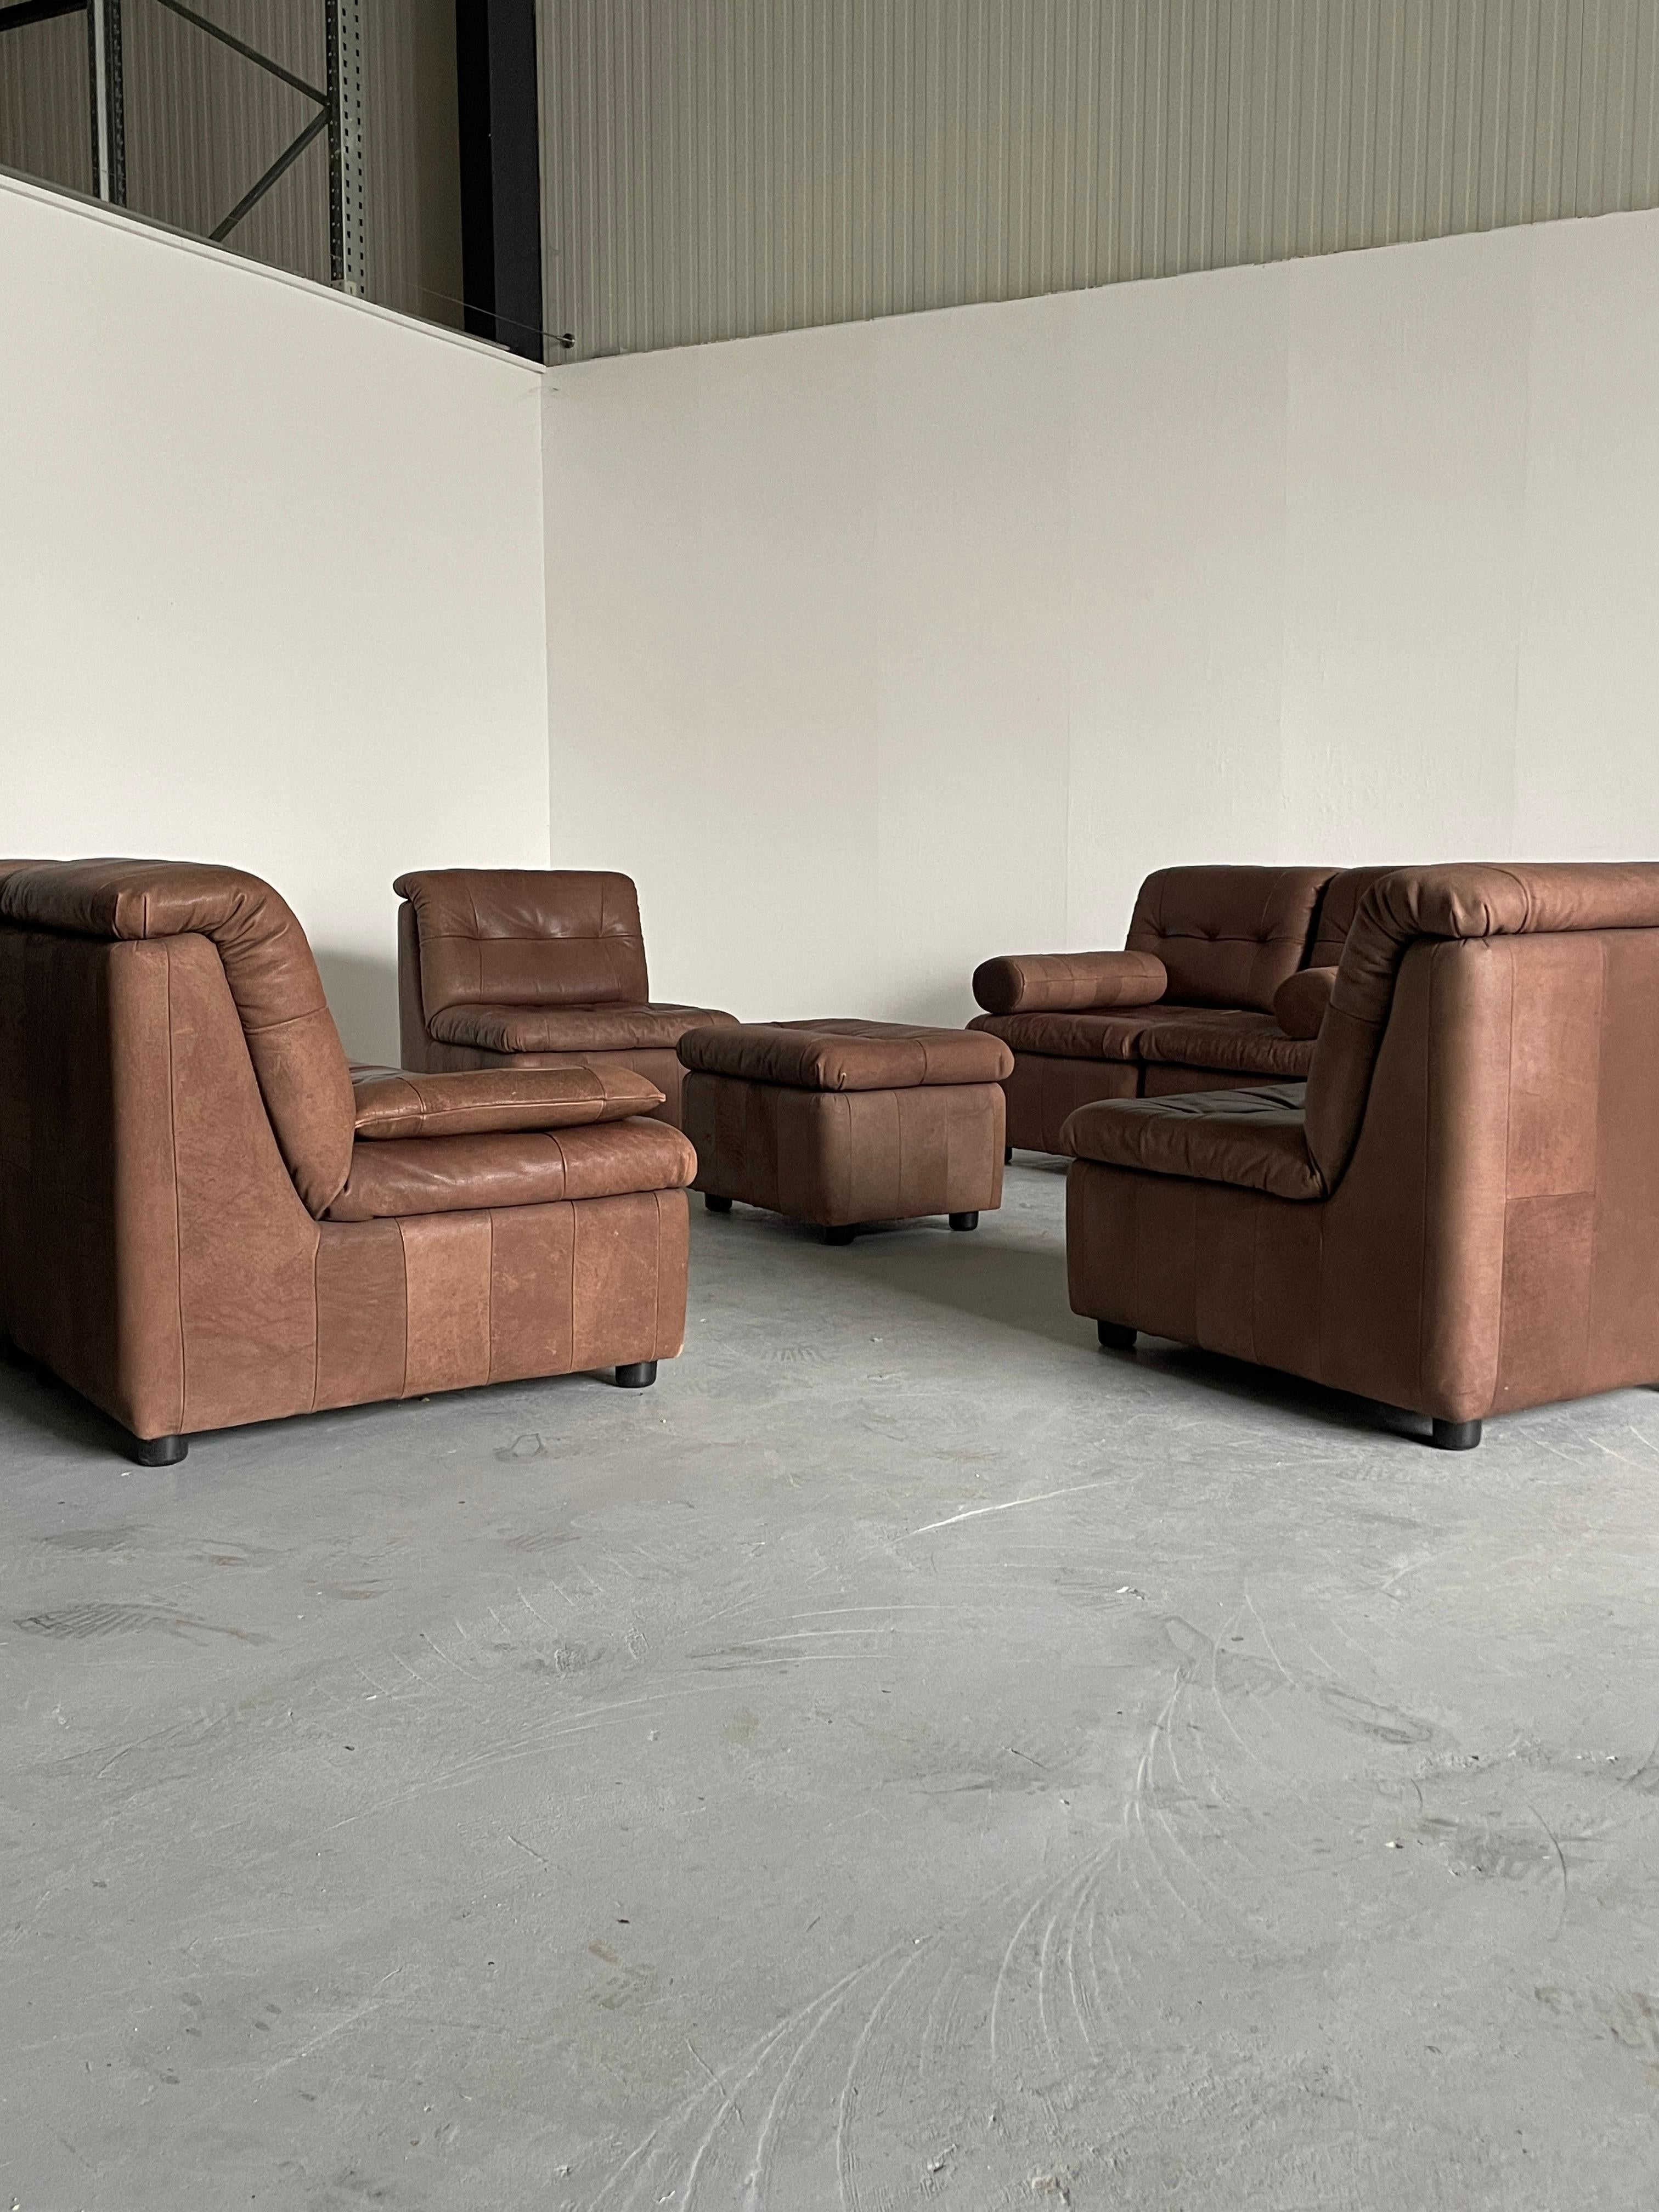 Late 20th Century Mid-Century-Modern Patchwork Leather Modular Seating Set in the style of De Sede For Sale